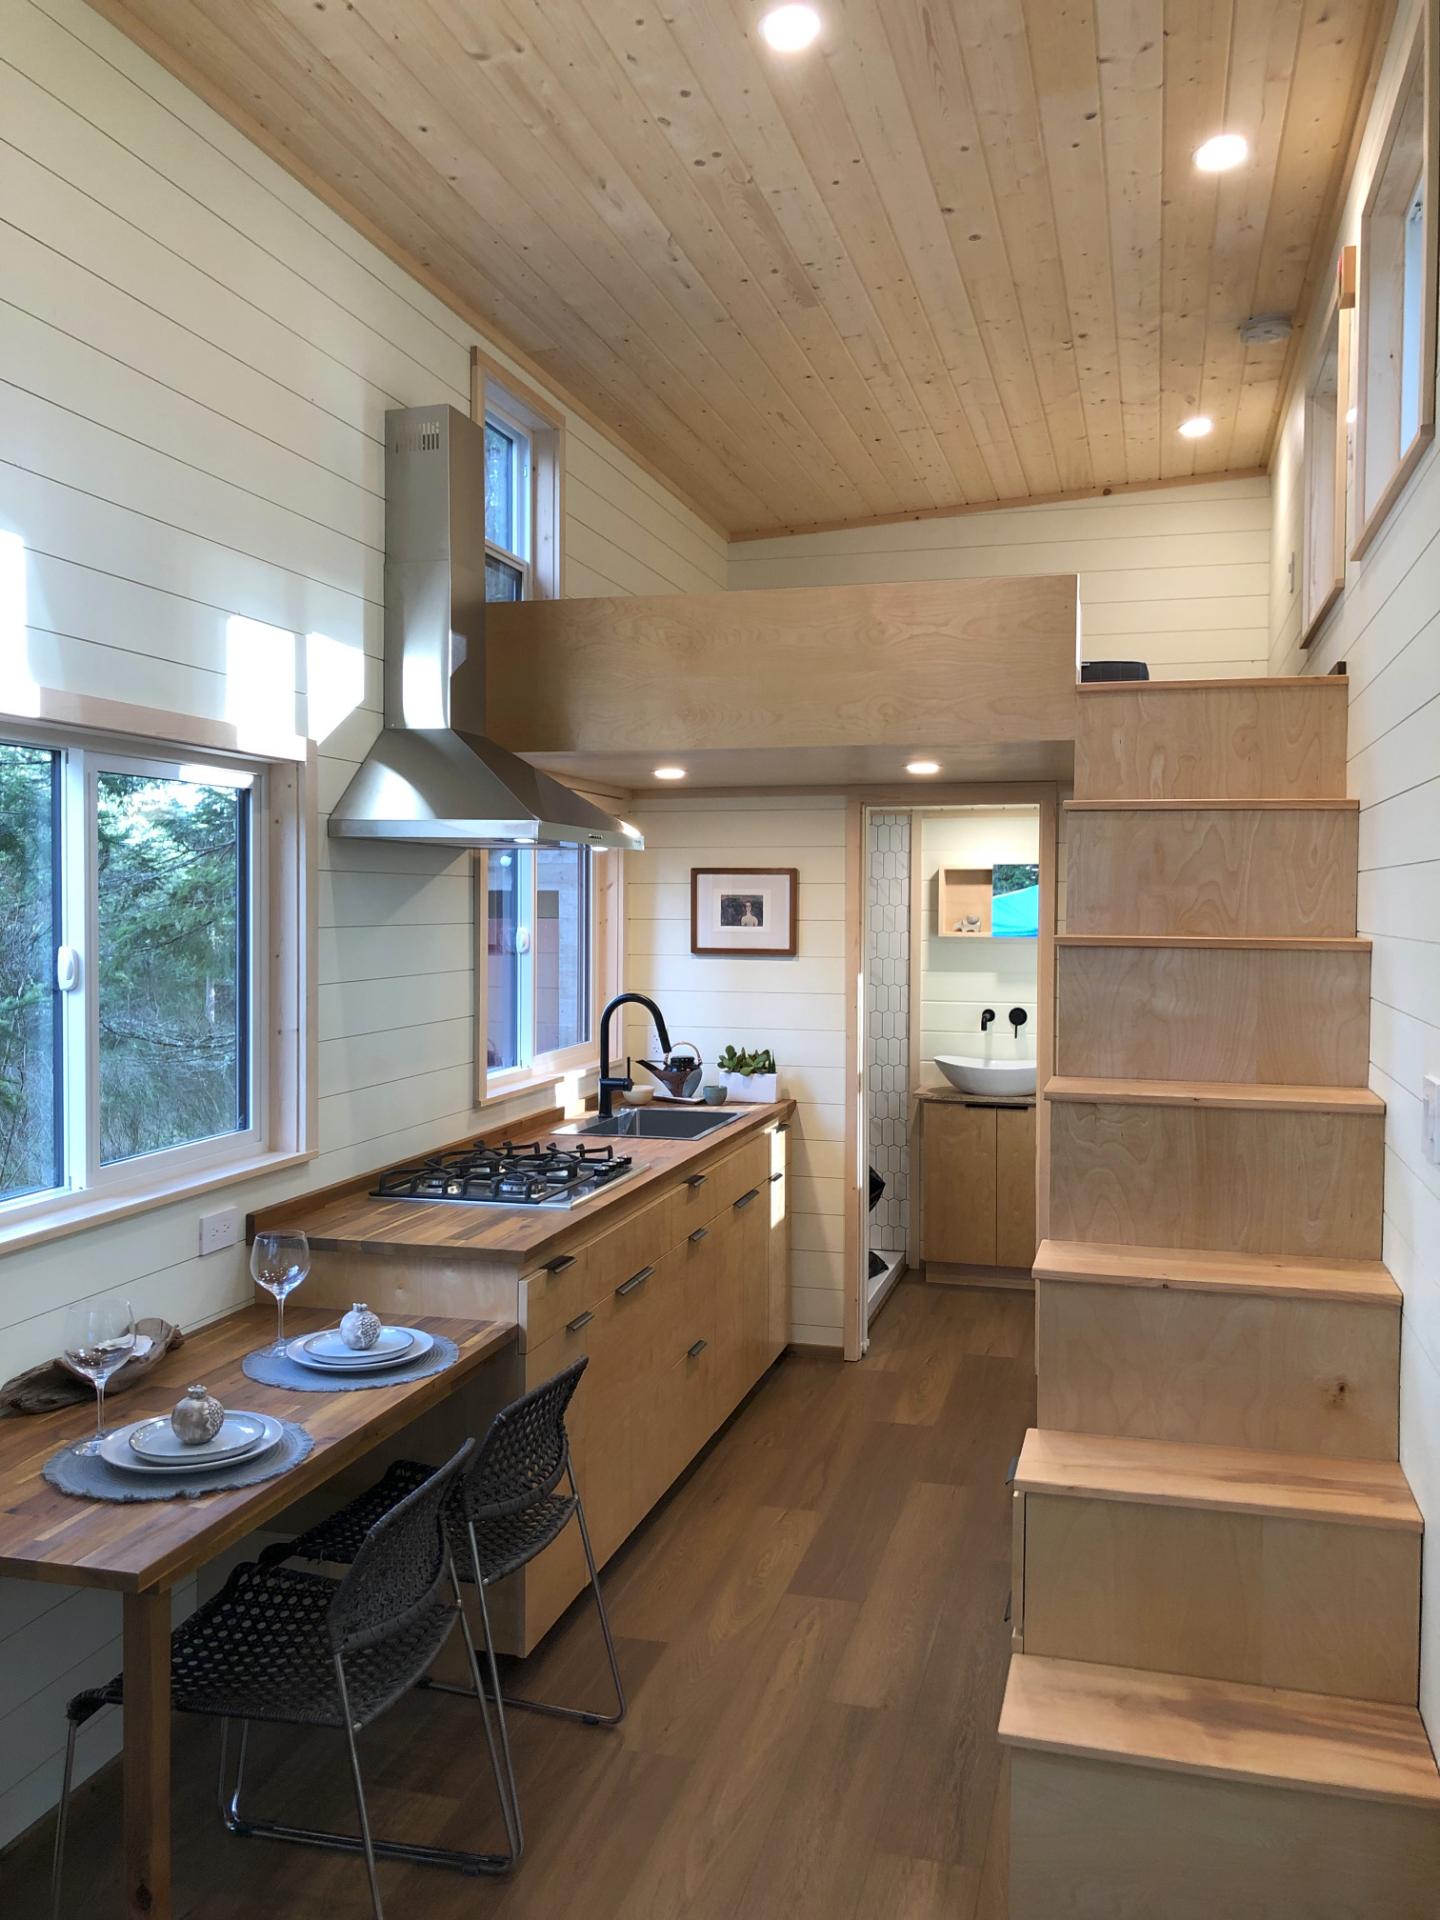 Kitchen and Stairs - Arbutus 24 by Artelle Tiny Homes